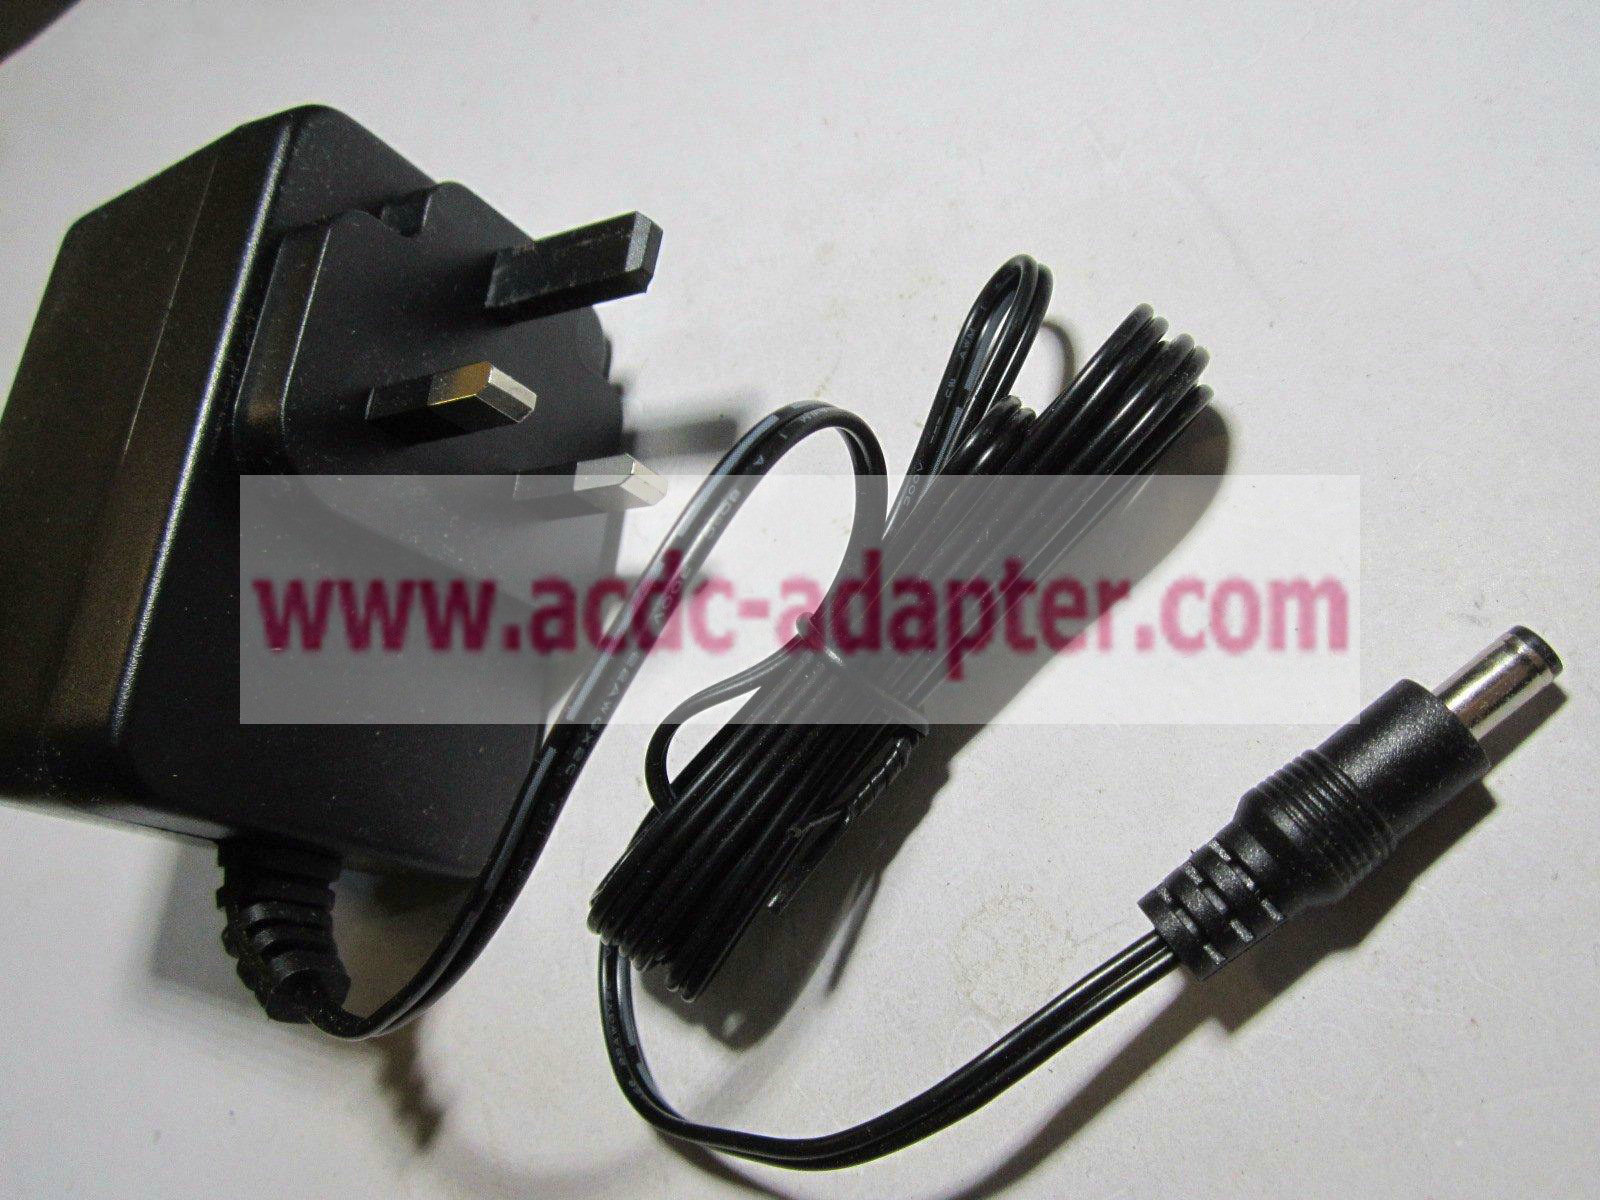 New replacement for 11.5V 1.6A AC-AC Adaptor Power Supply for Creative SBS 2.1 370